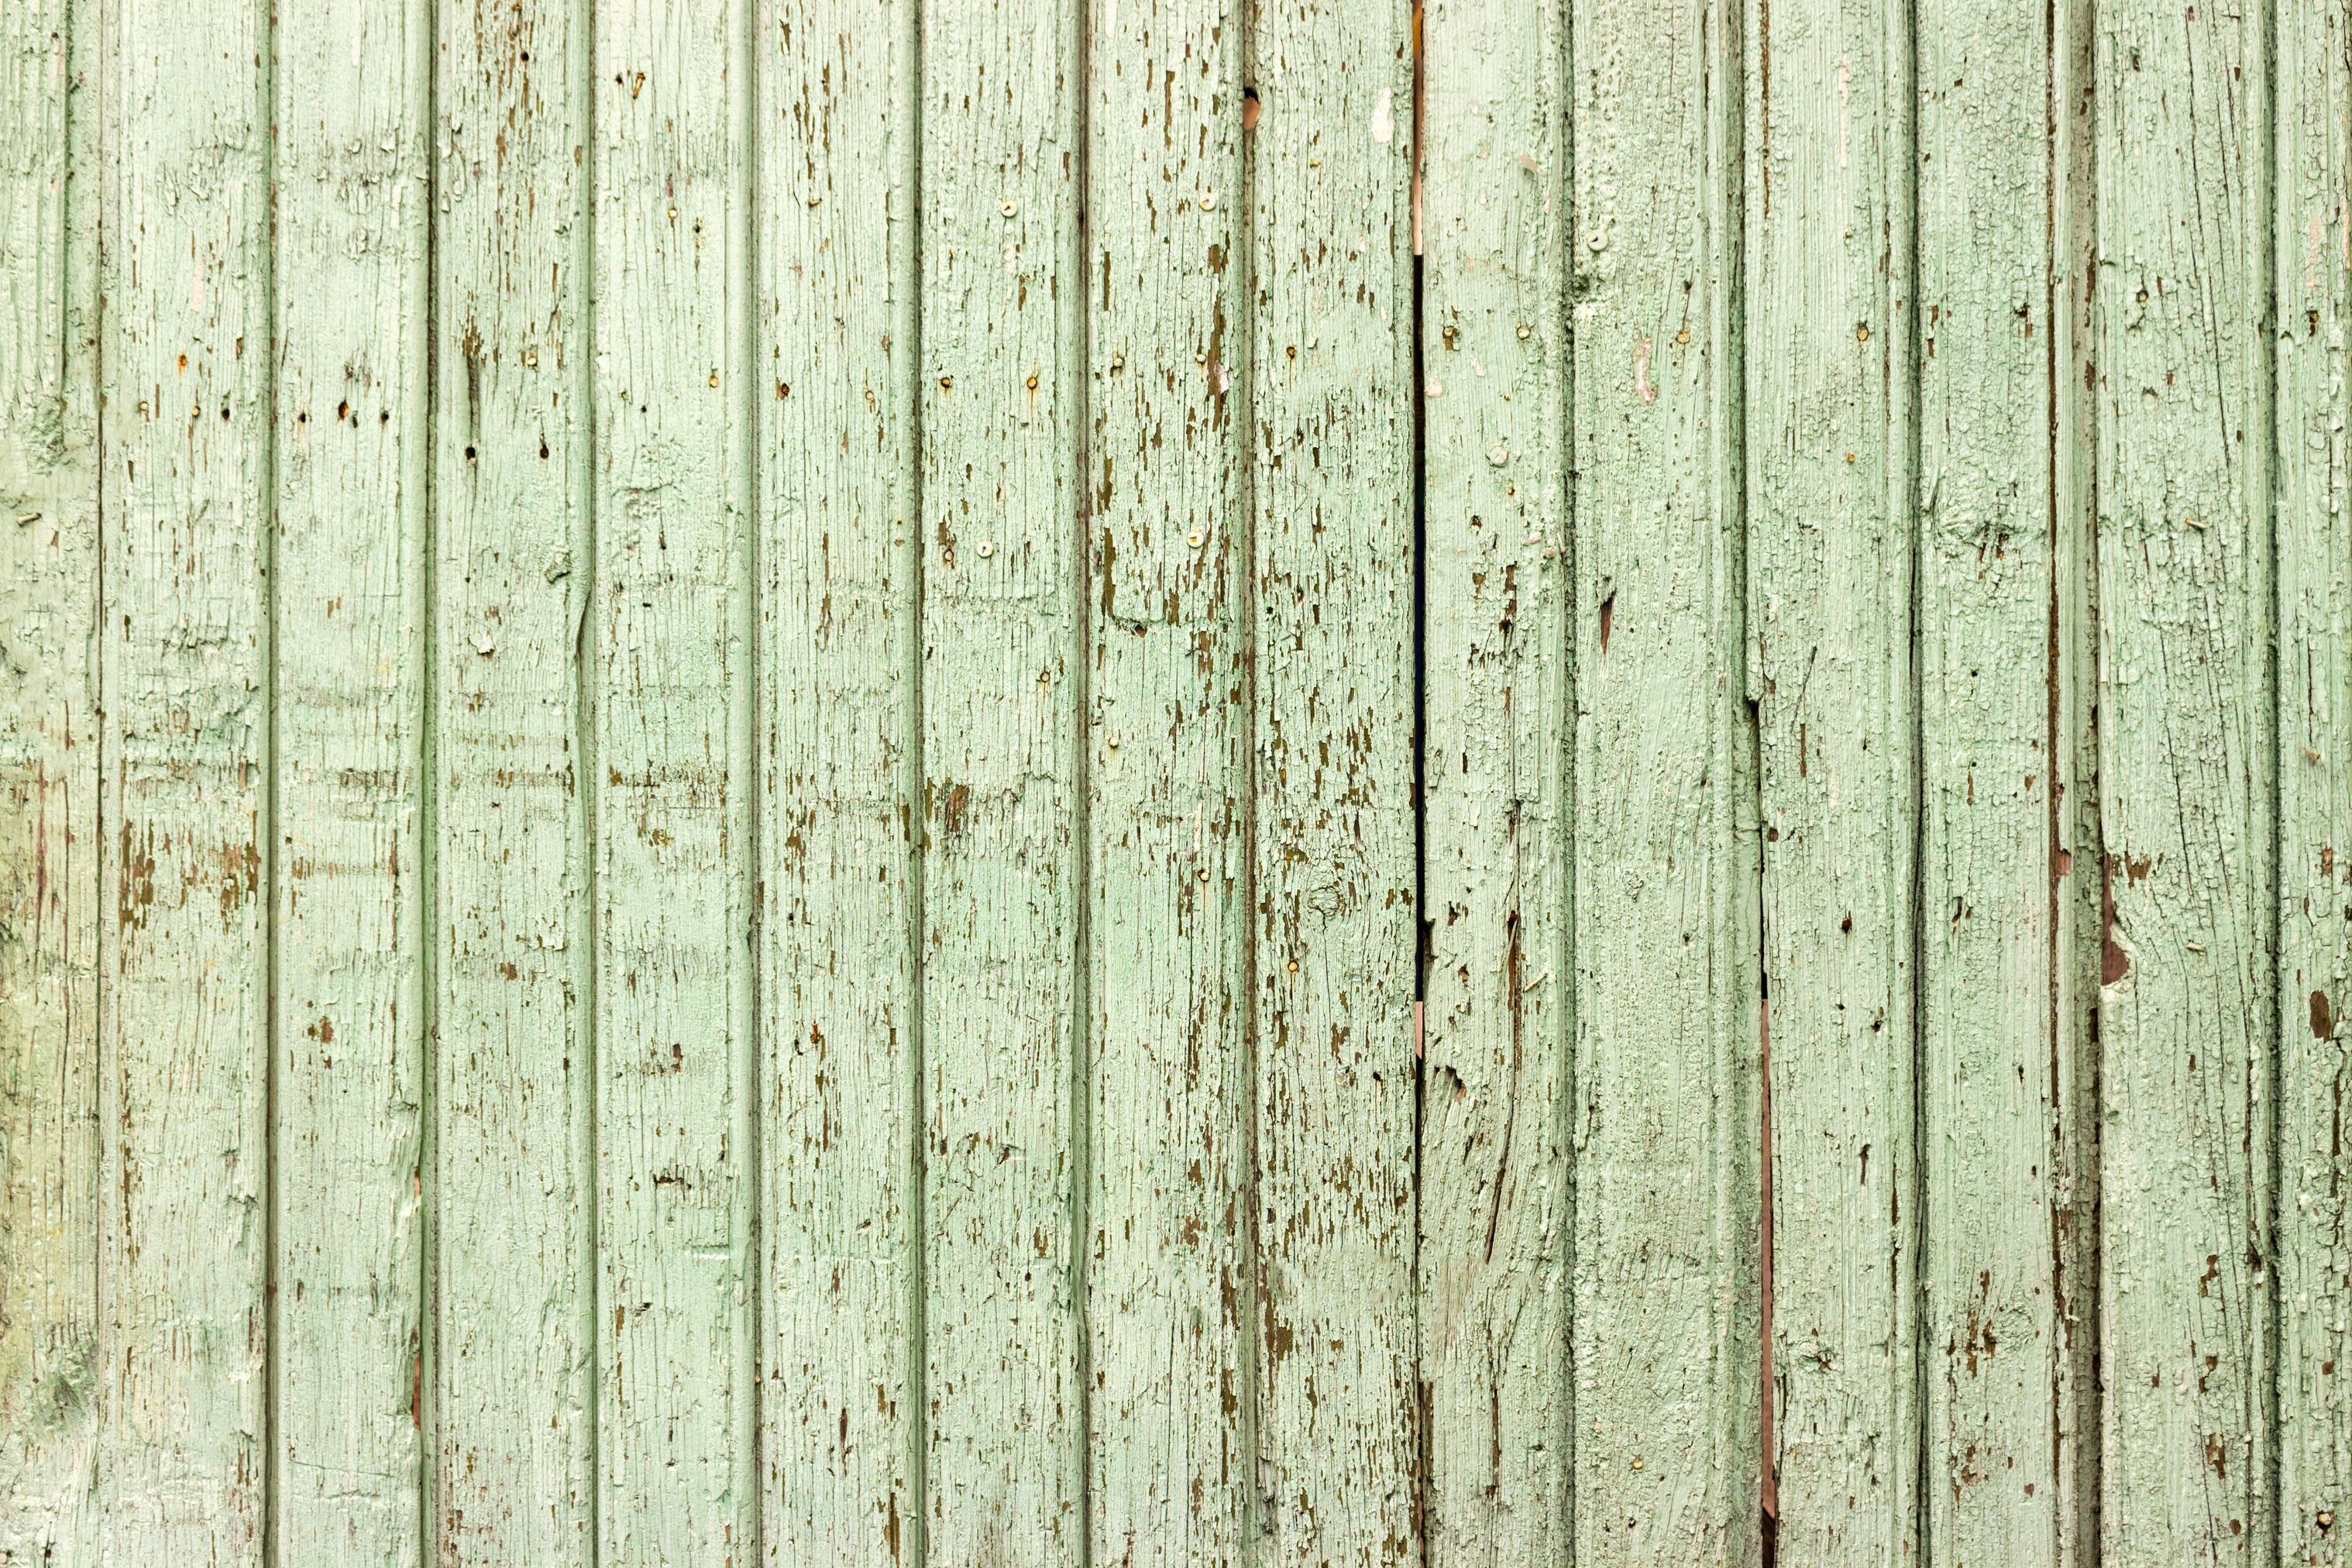 Bright Green Wooden Background with Peeling Paint and Vertical Boards